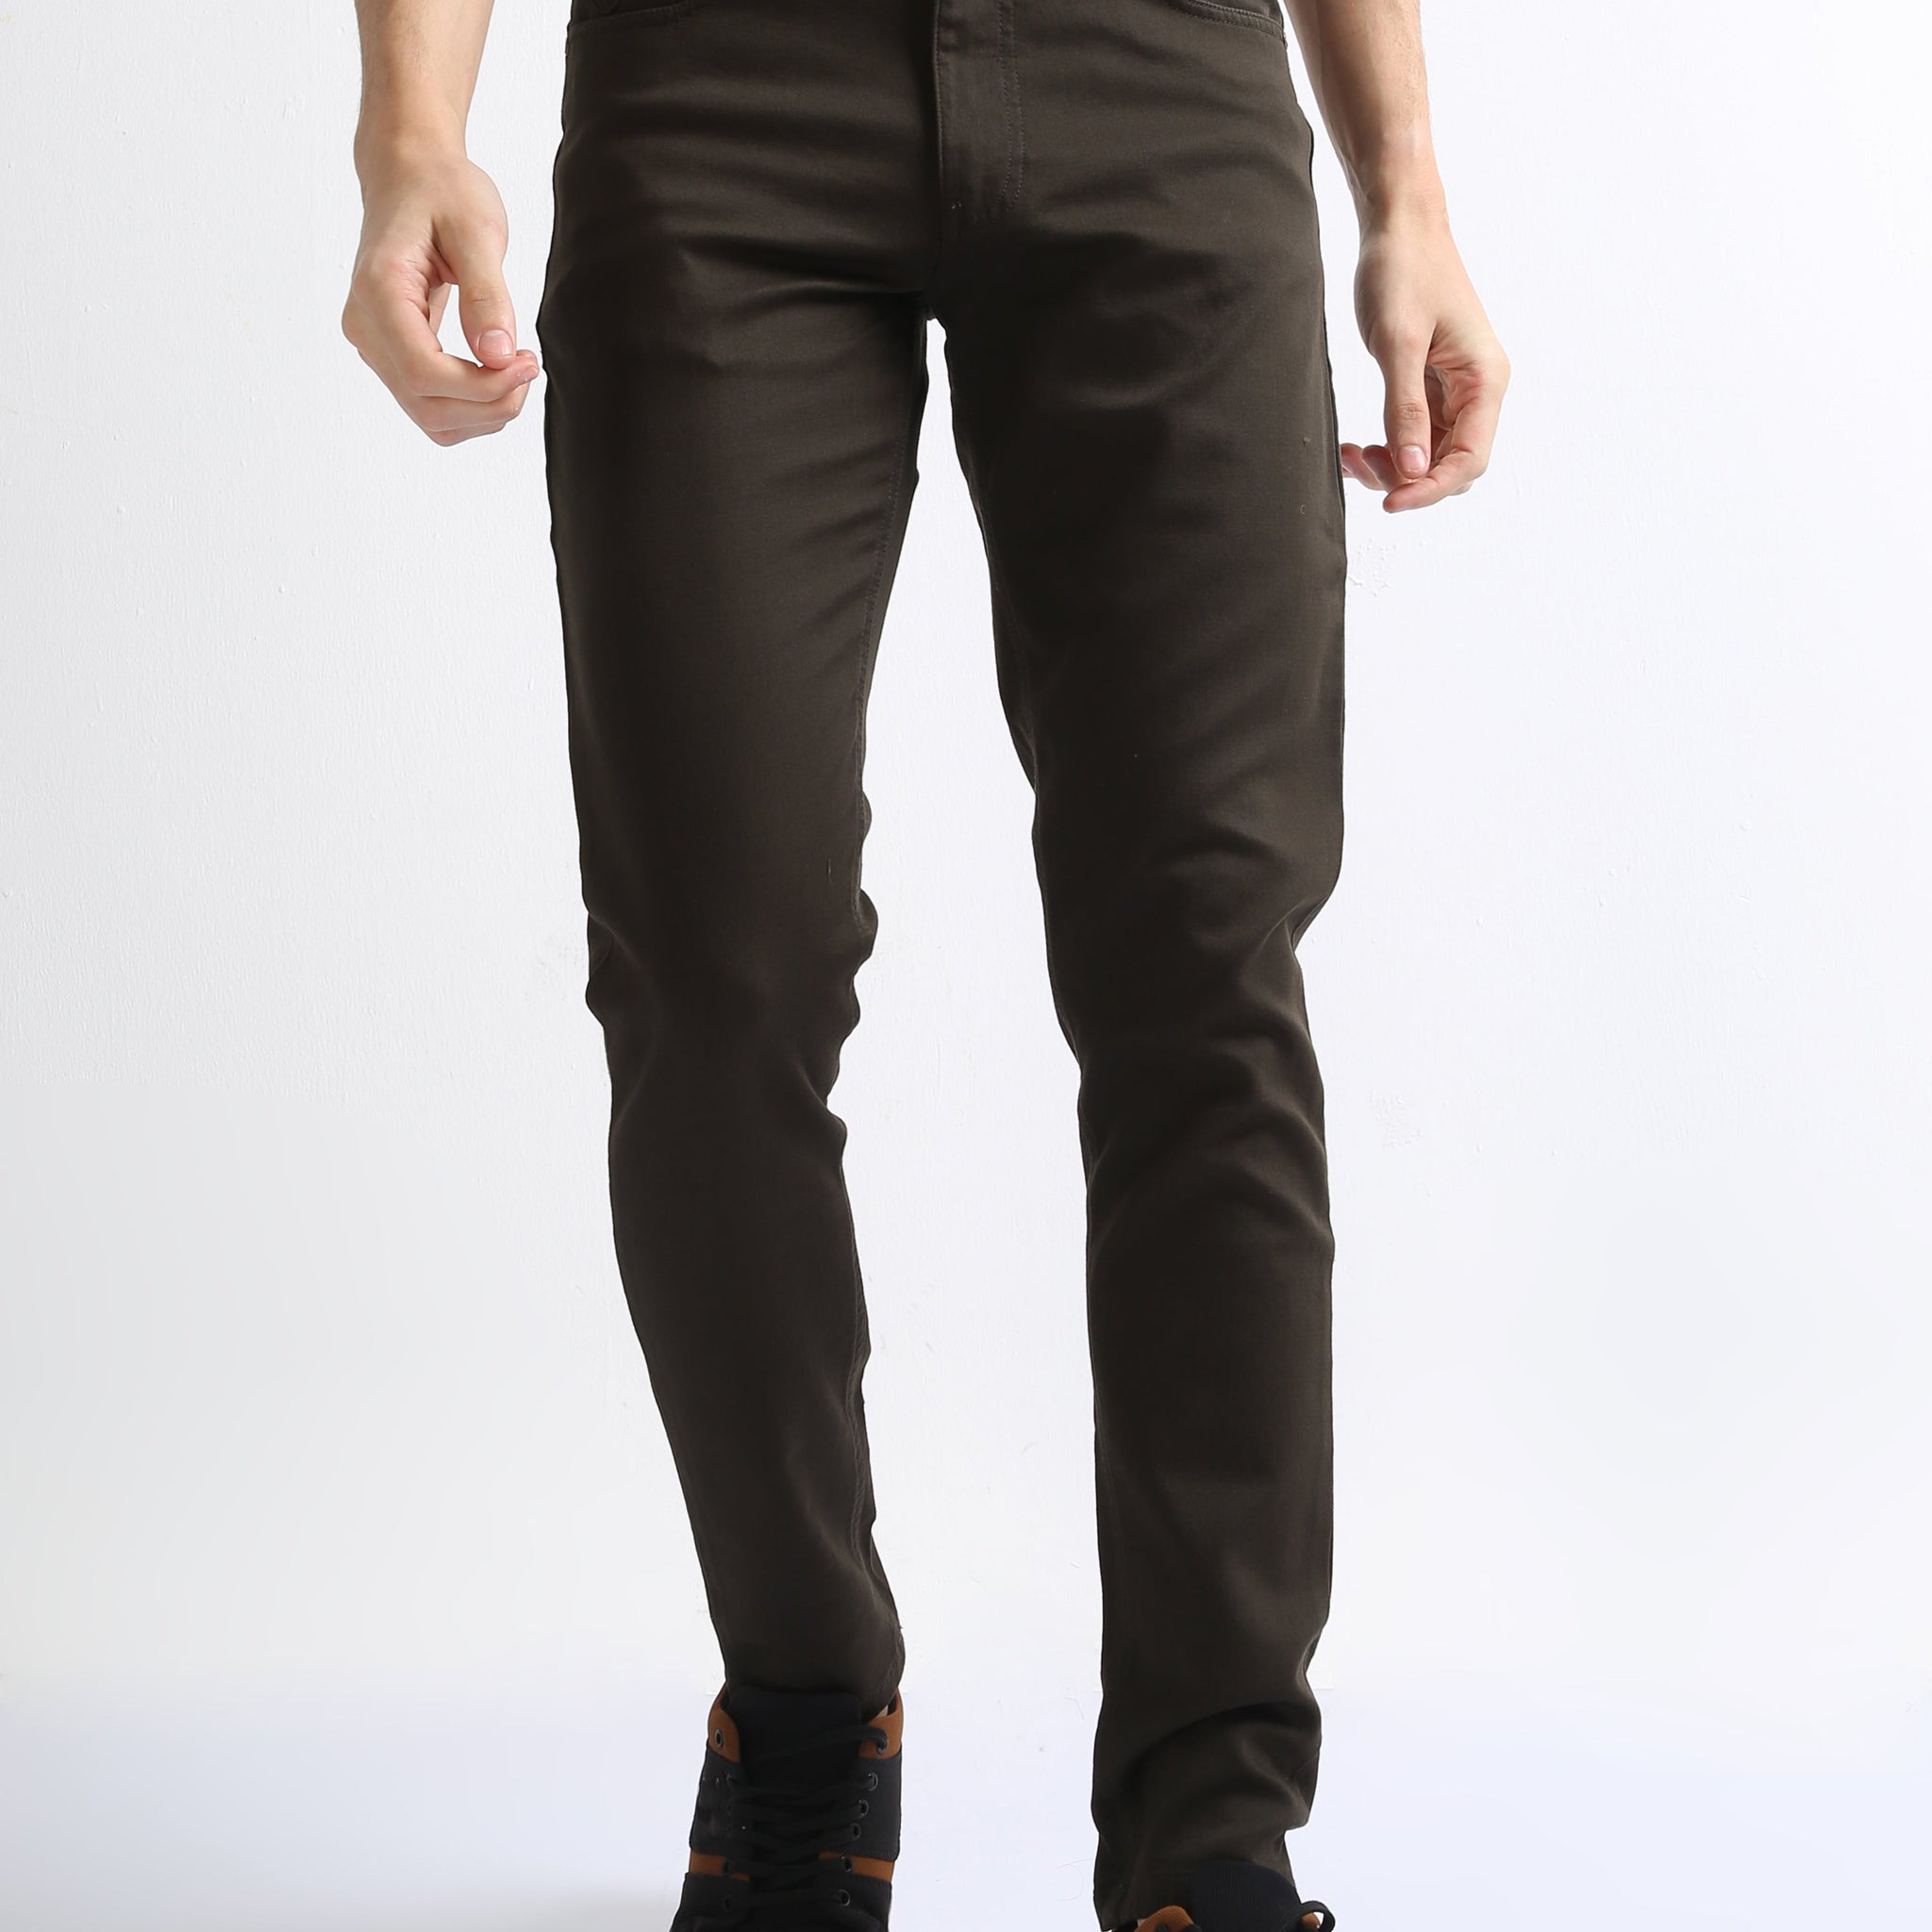 Buy Casual Cotton Stretch Trousers Online